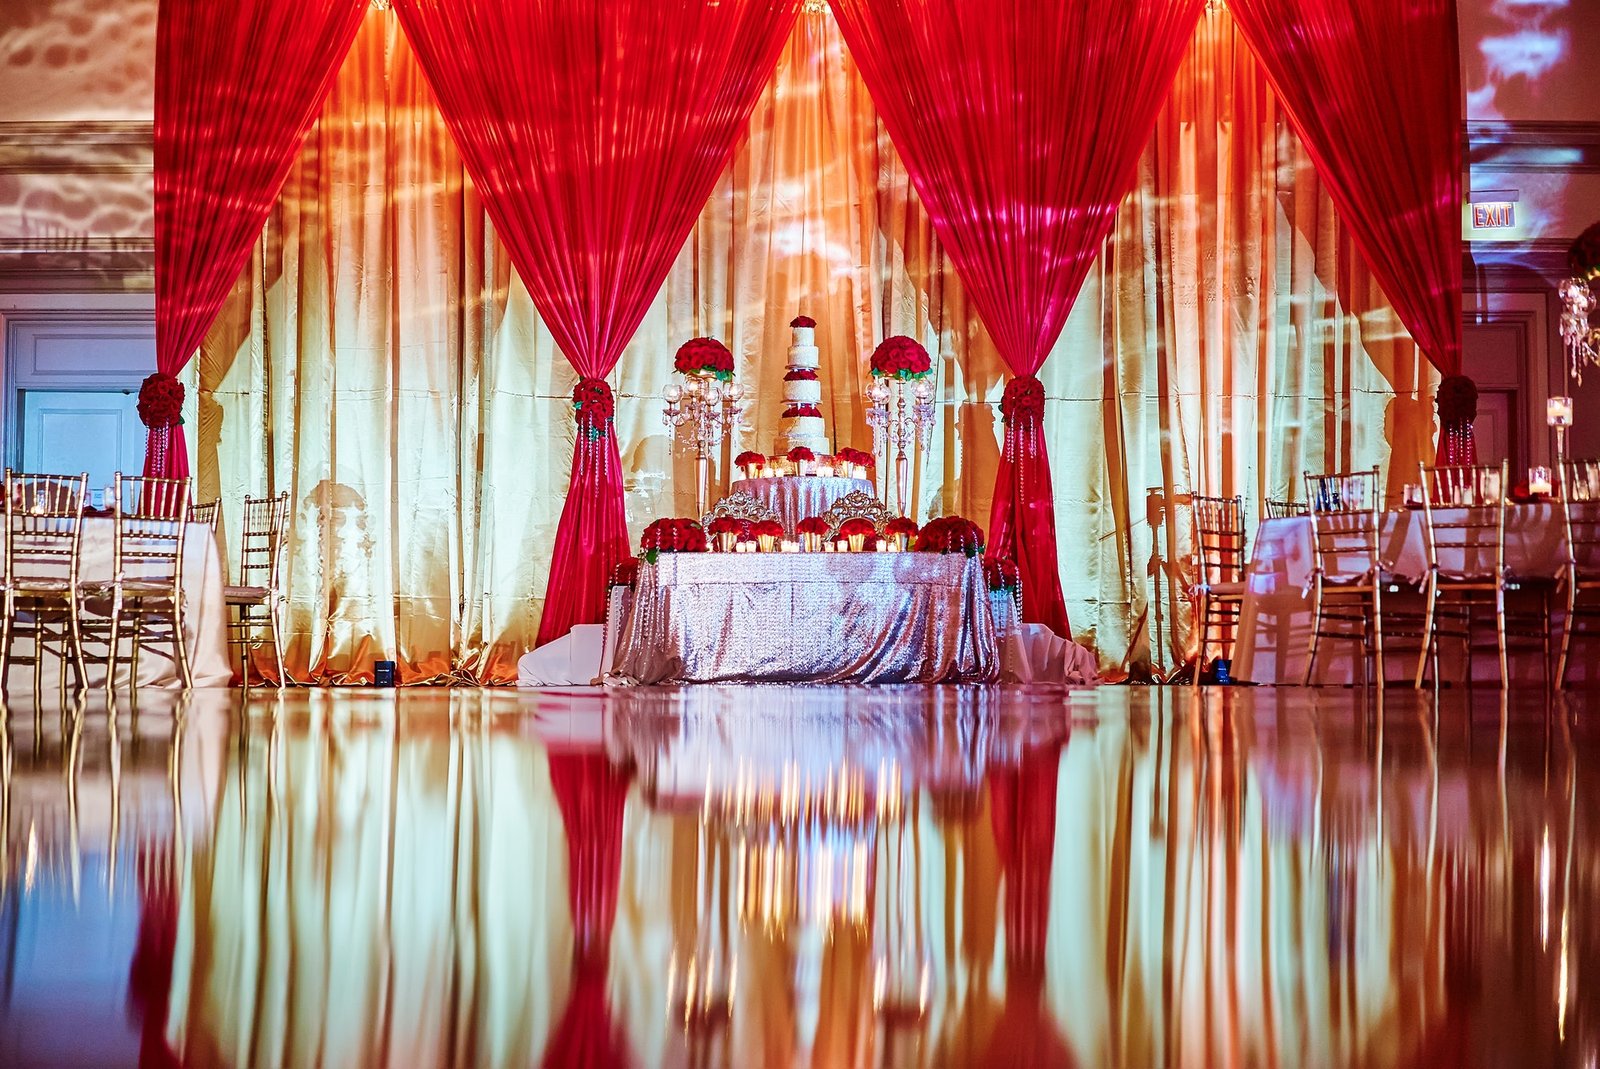 Beautiful reflection of wedding cake and dining table arrangement with gold and red fabric